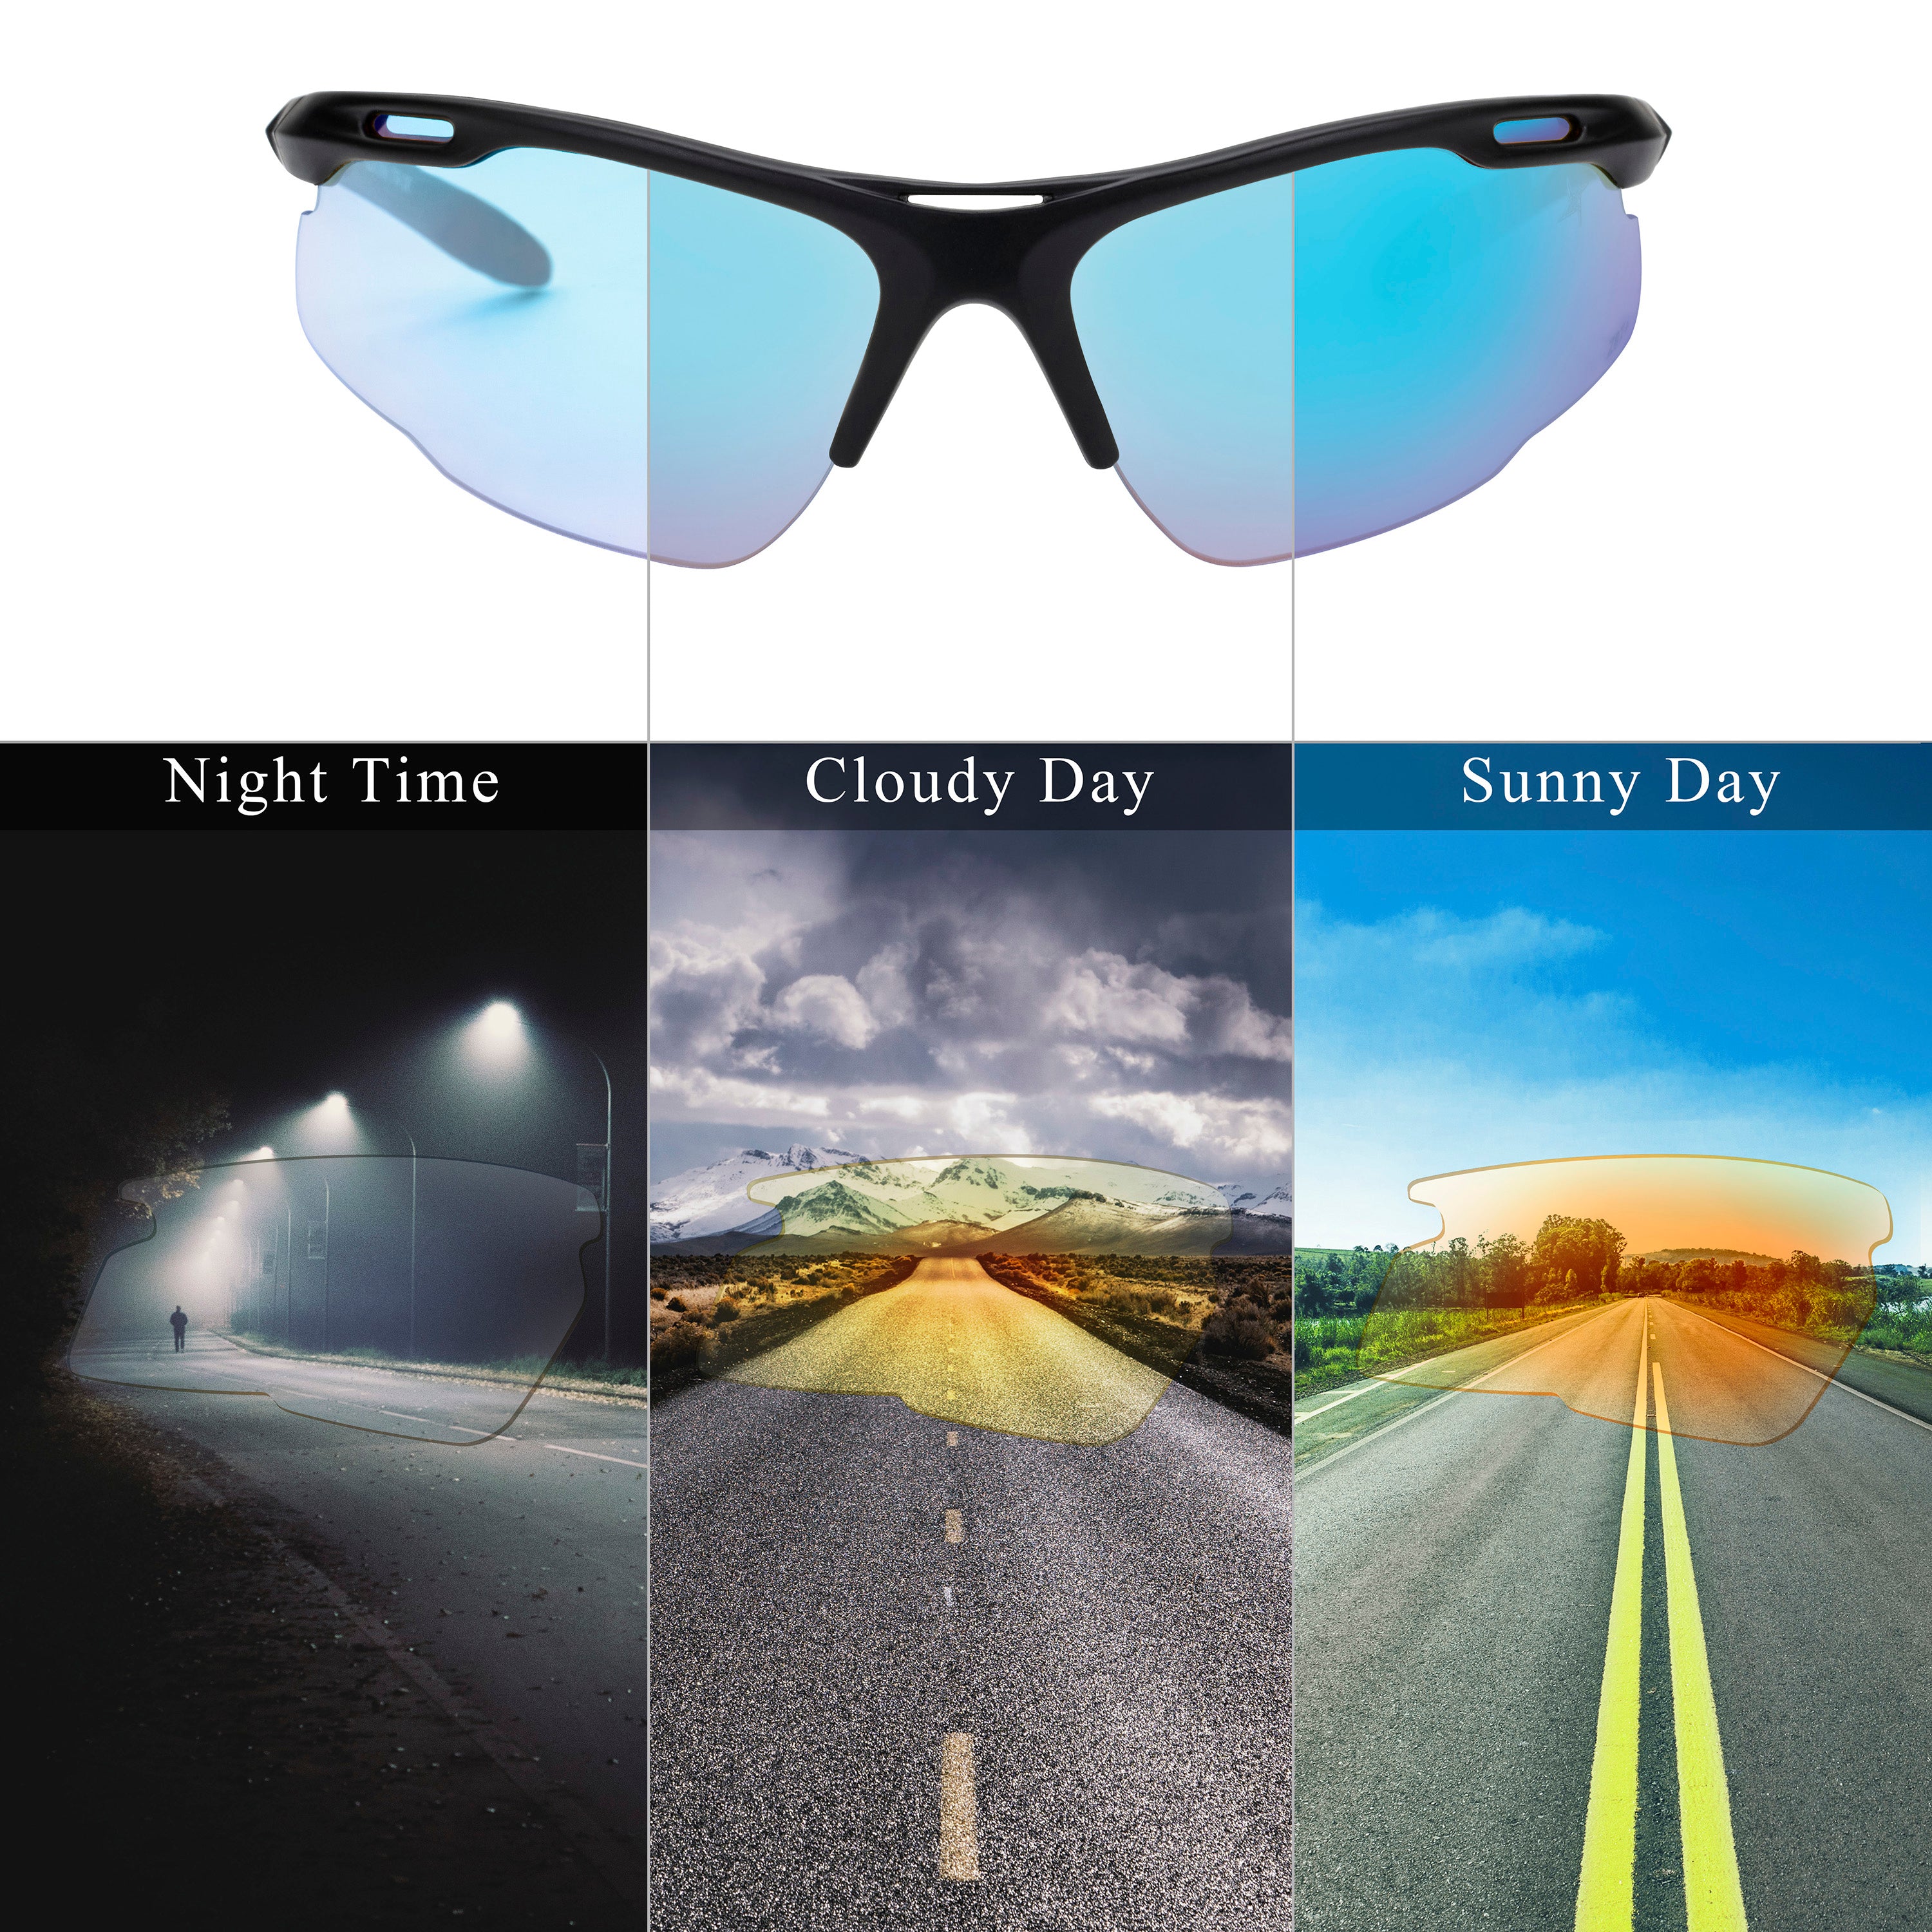 Clear to Grey Photochromic Lens with Blue Mirror Coating Half Frame Wrap Around Sport Safety Sunglasses.